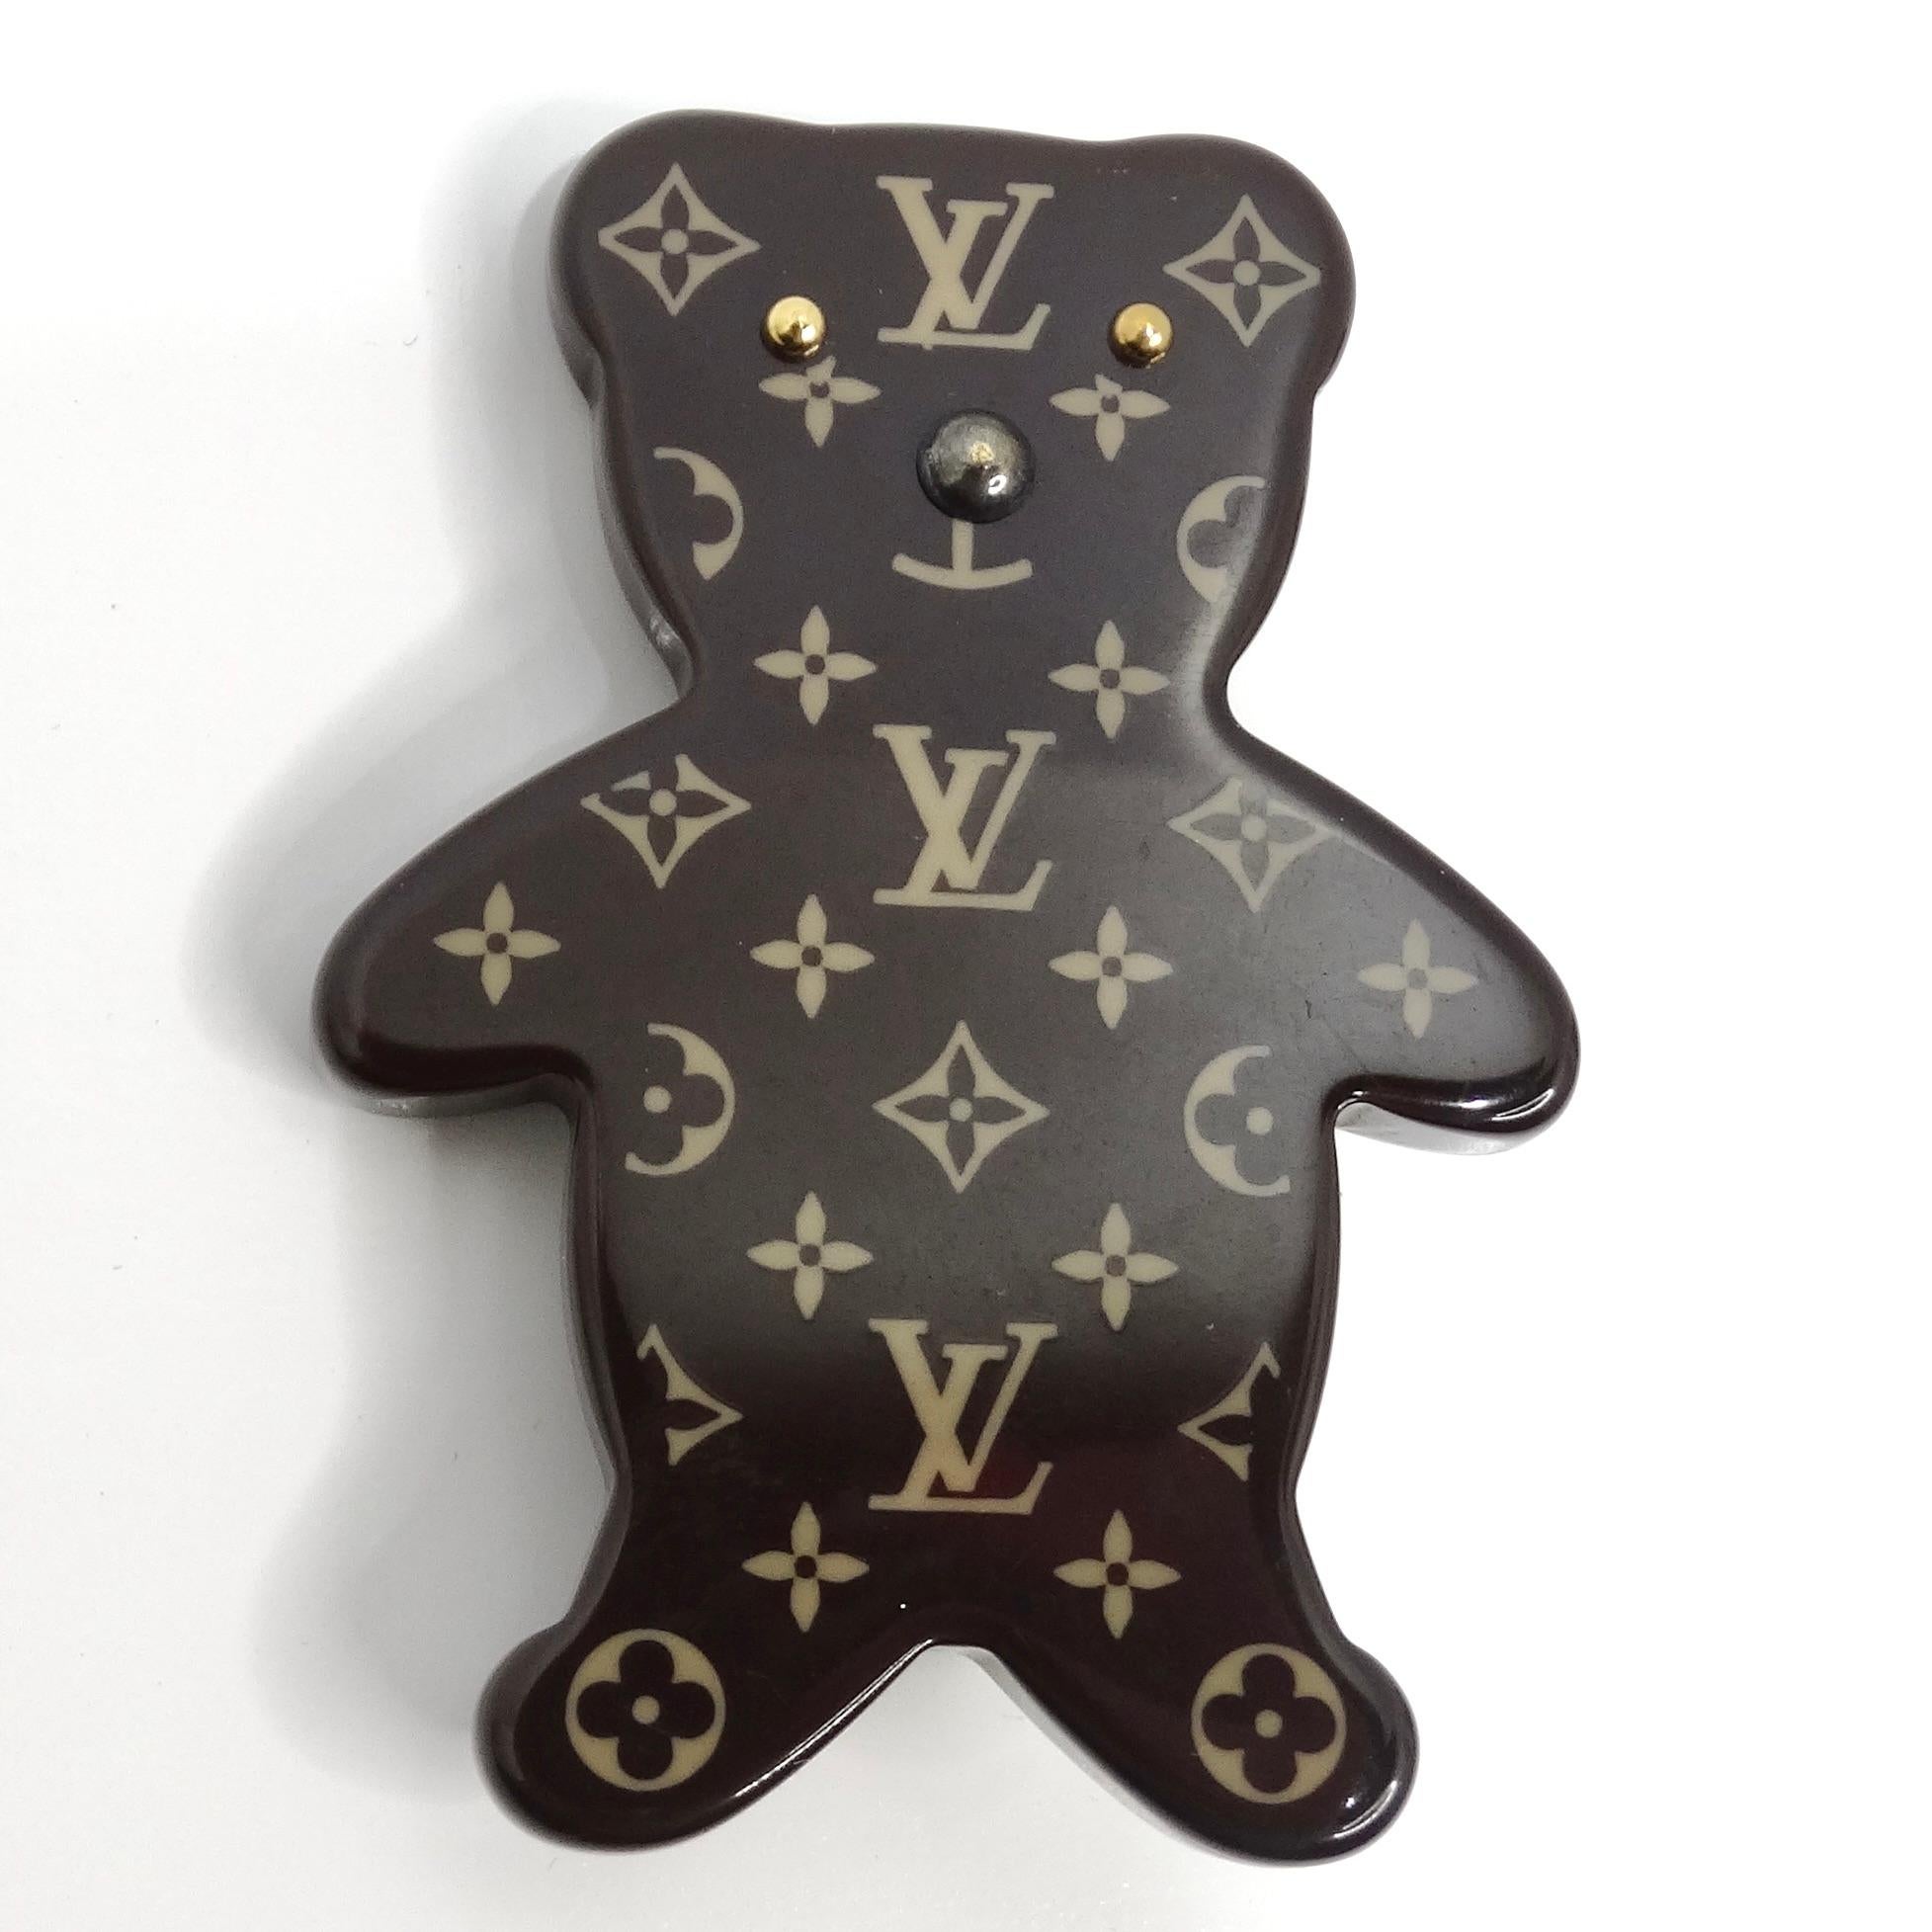 Introducing the charming Louis Vuitton Monogram Teddy Bear Brooch, a playful and luxurious accessory that adds a touch of whimsy to any ensemble. Crafted from high-quality resin, this adorable brooch is designed in the shape of a teddy bear,